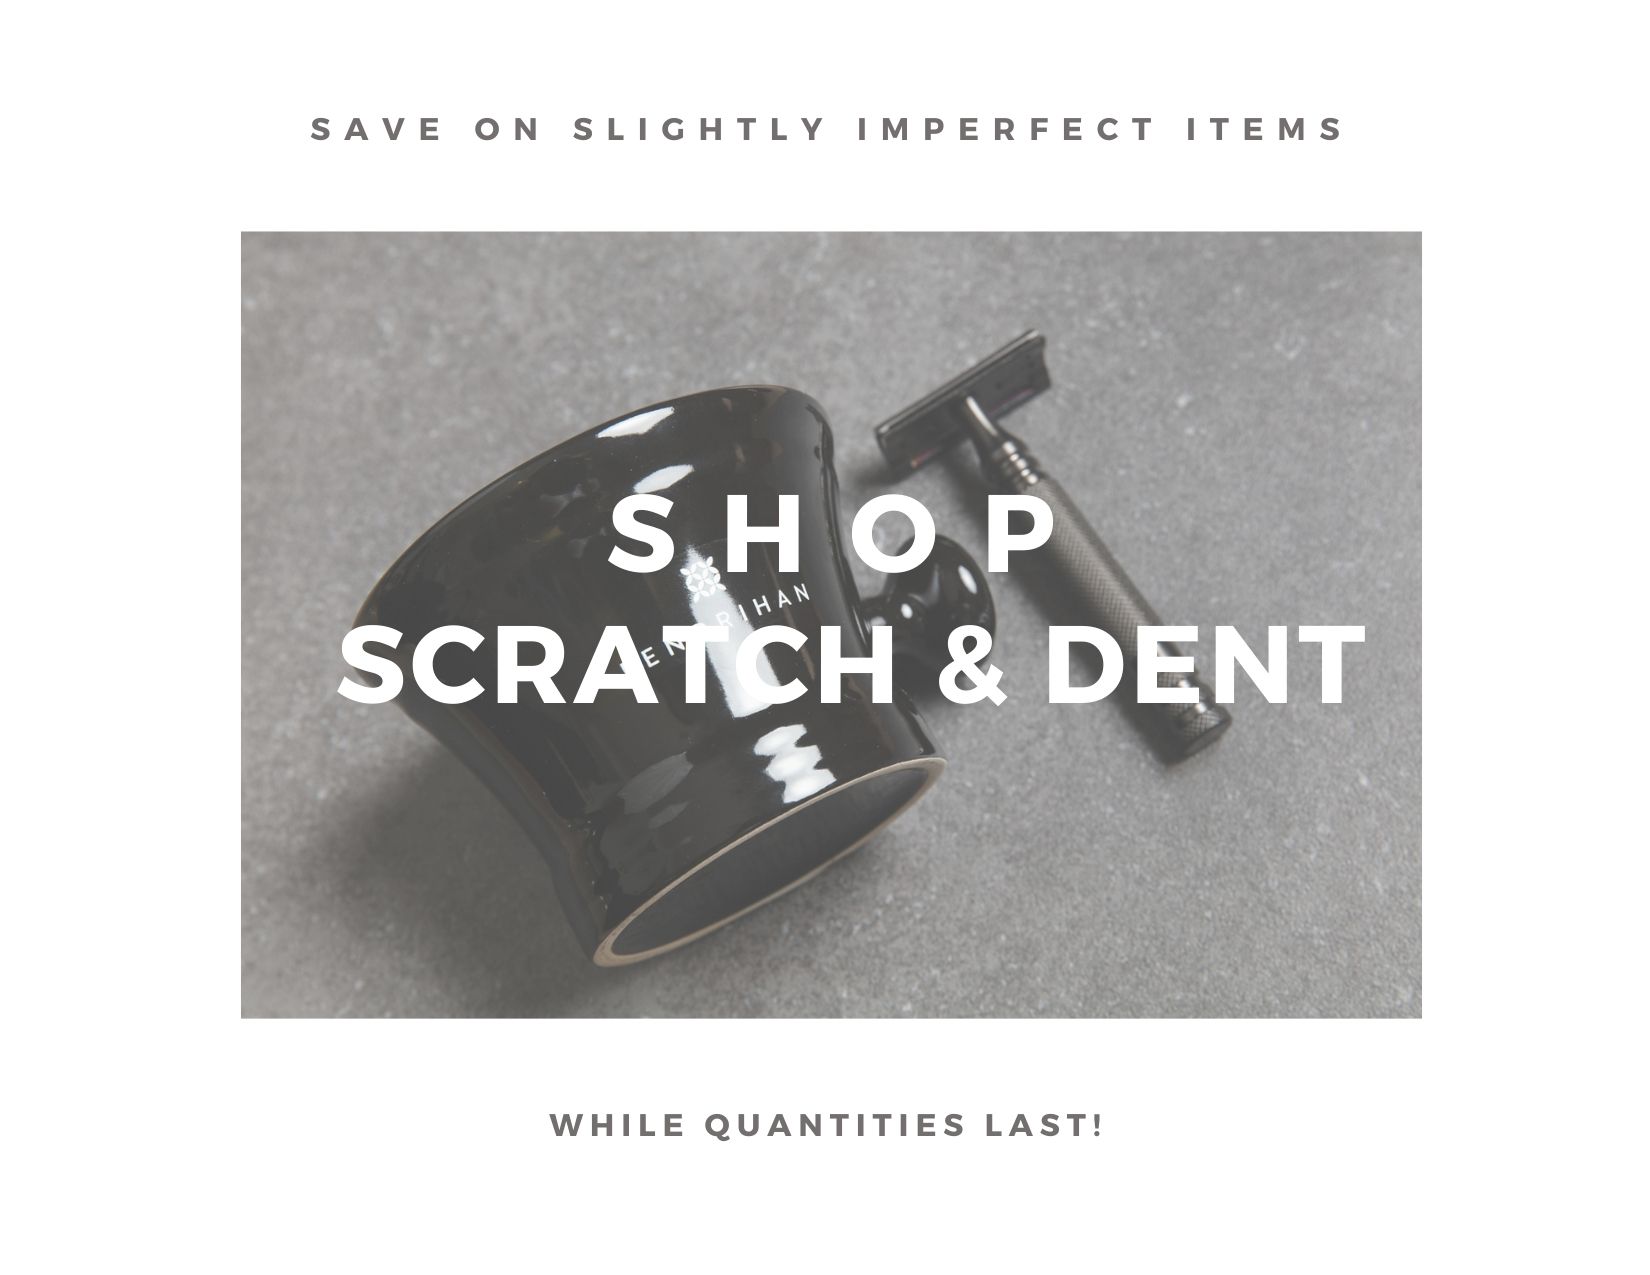 Save with Scratch & Dent!